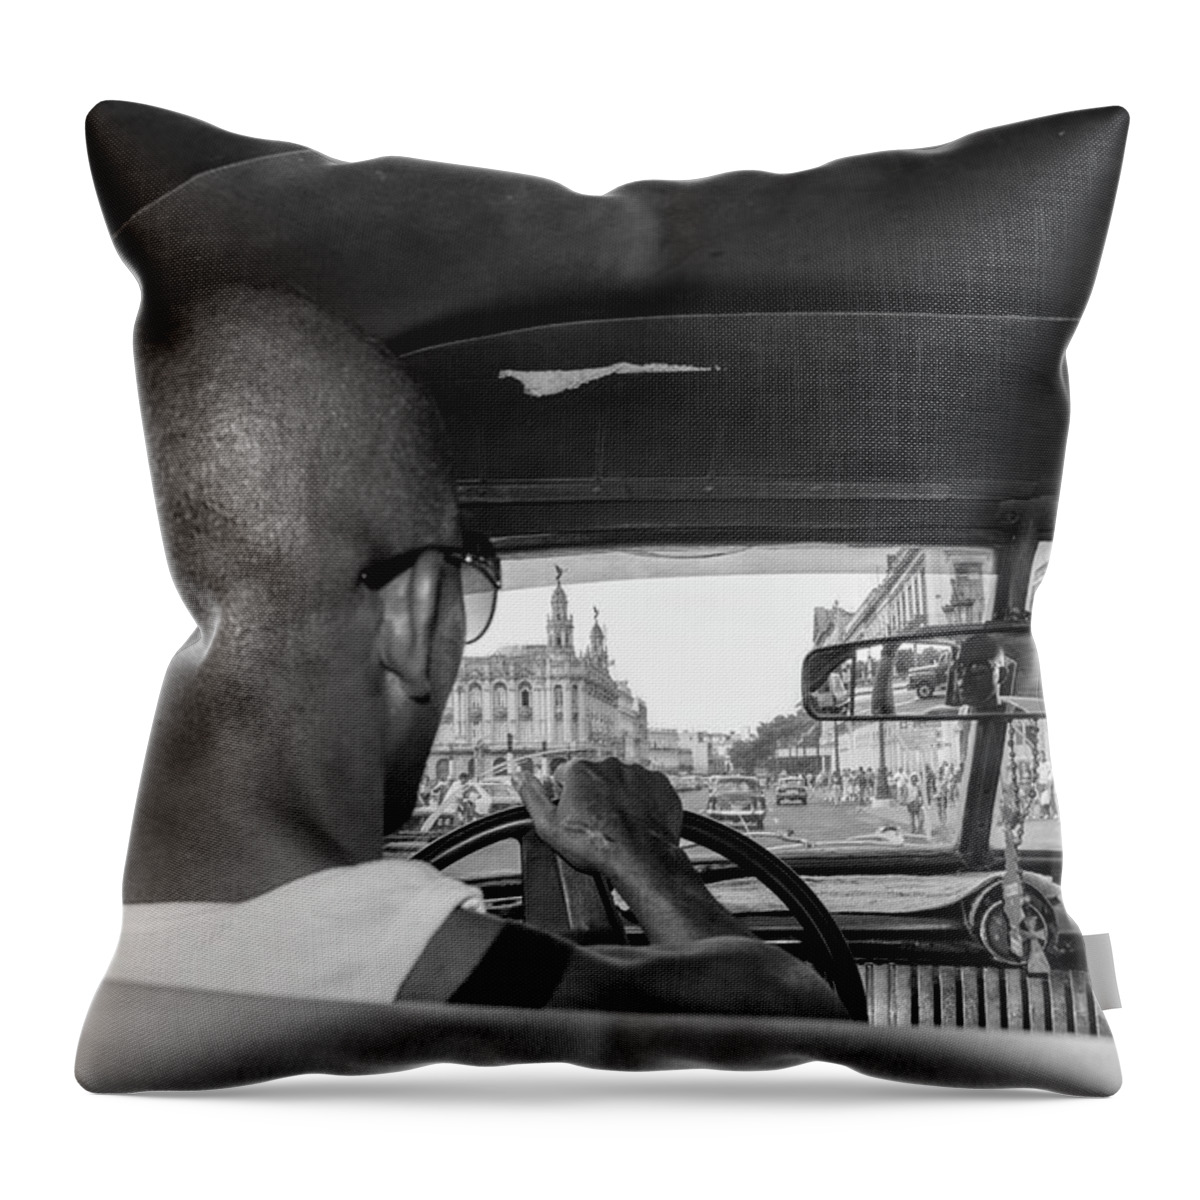 Cuba Throw Pillow featuring the photograph From the Taxi by Marla Craven